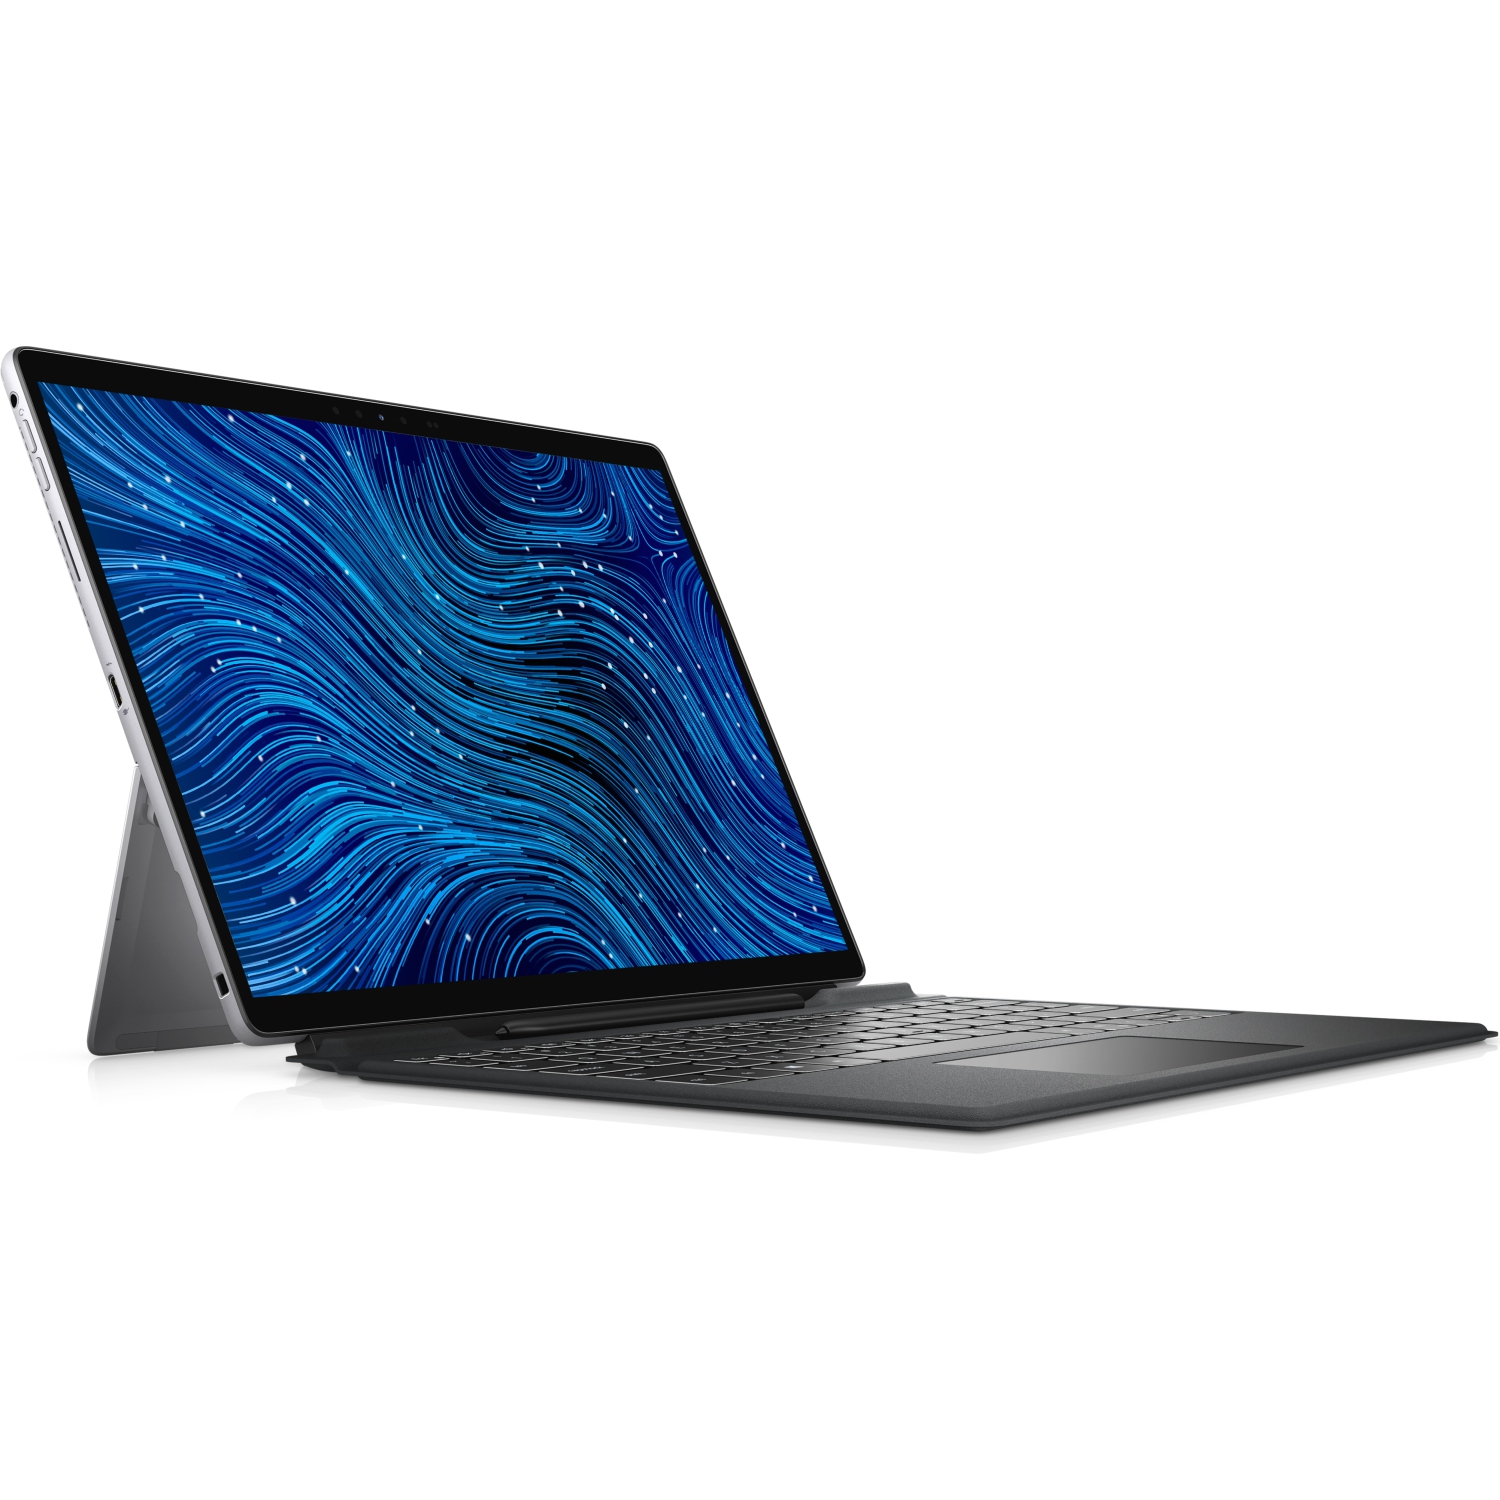 Refurbished (Excellent) - Dell Latitude 7000 7320 Detachable 13 2-in-1 (2021), 13" FHD+ Touch, Core i5, 512GB SSD, 16GB RAM, 4 Cores @ 4.2 GHz, 11th Gen CPU Certified